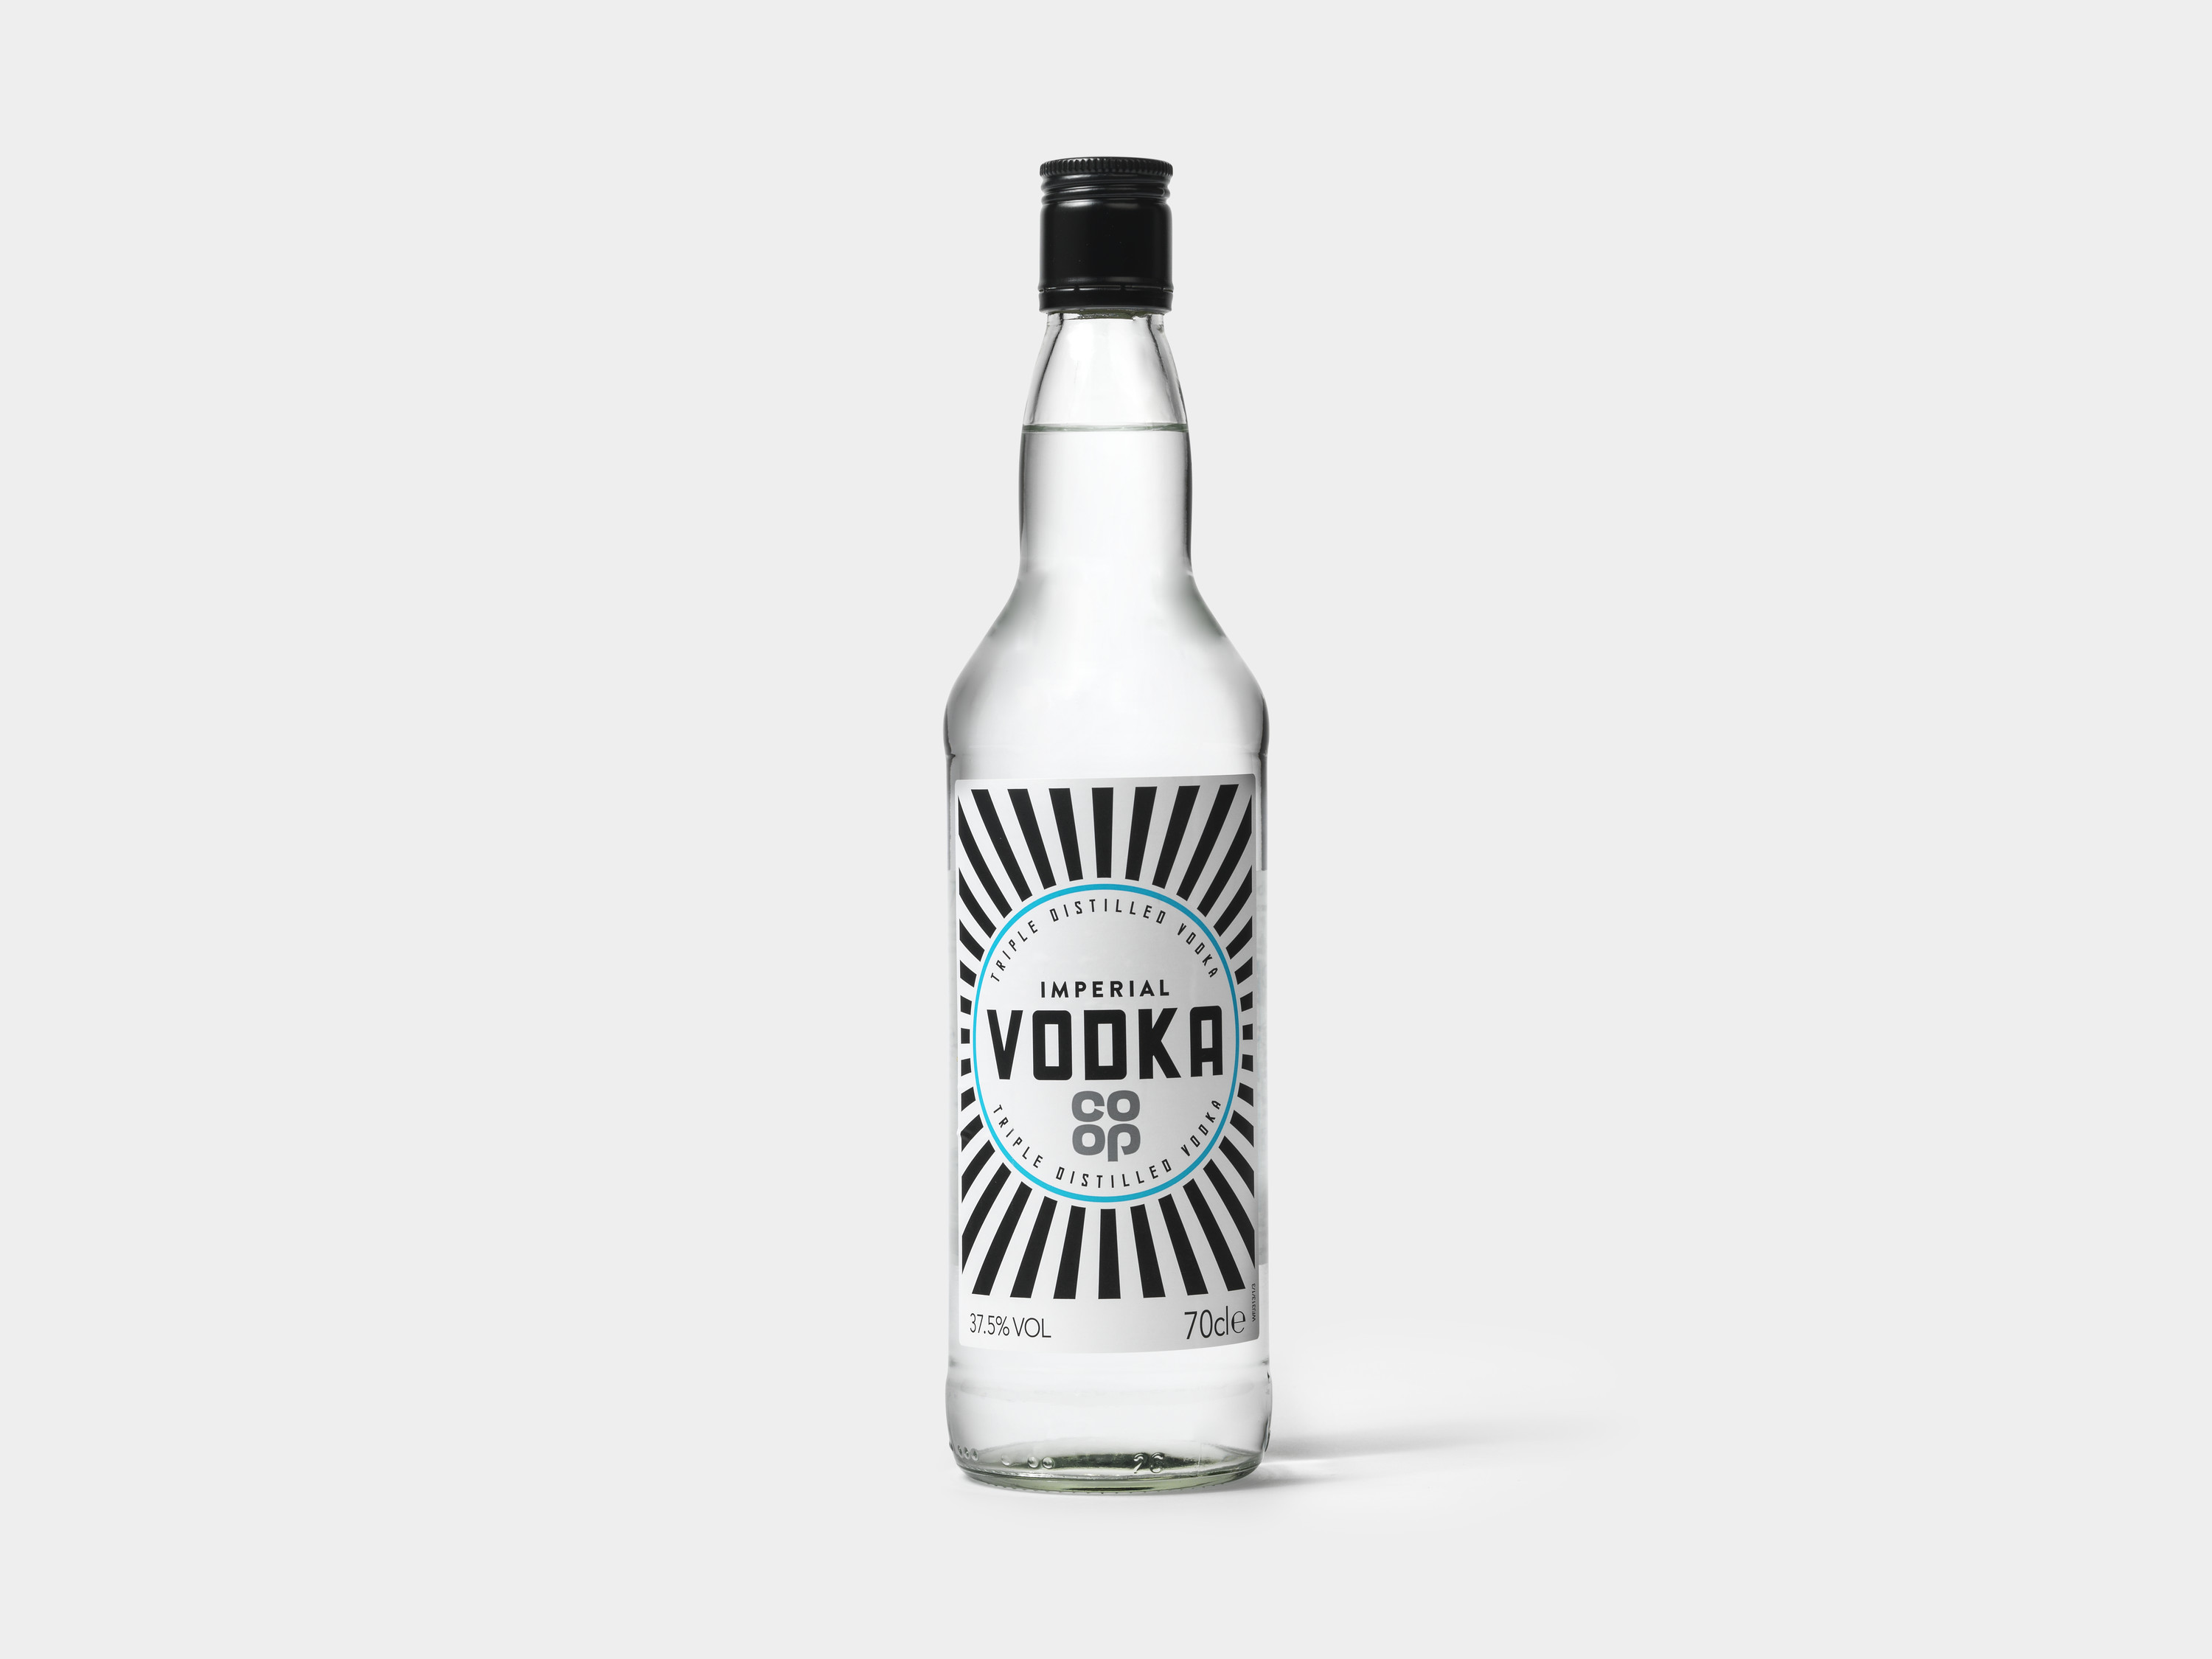 Co Op S 13 Vodka Voted One Of The Best In The World Co Op